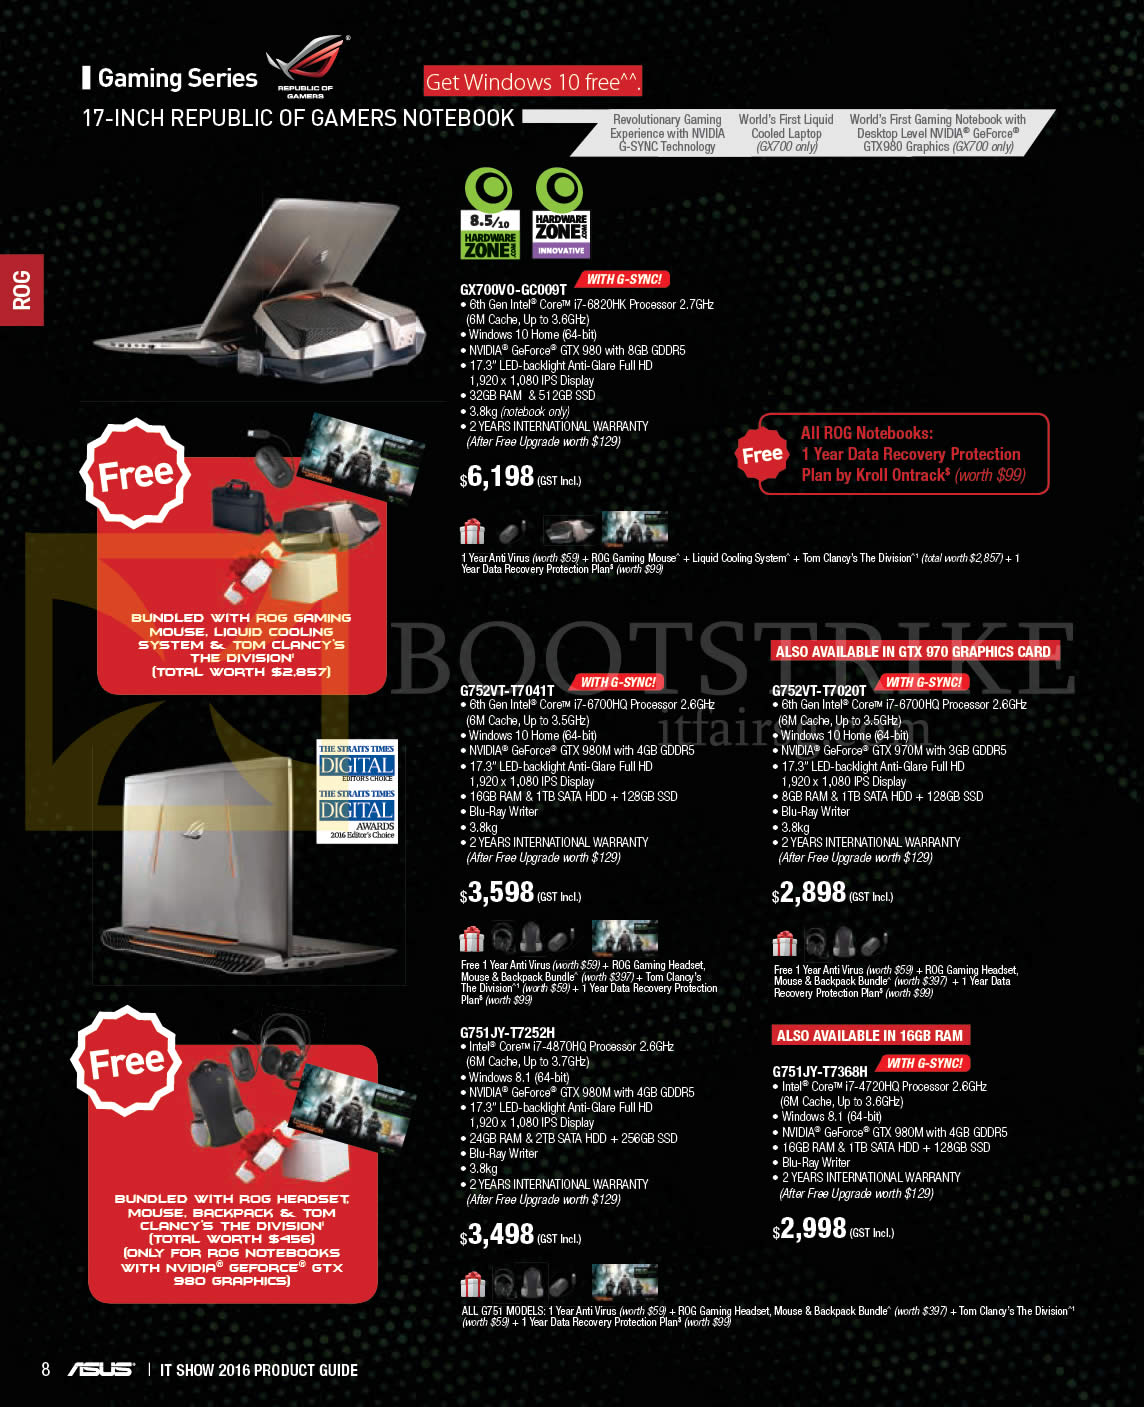 IT SHOW 2016 price list image brochure of ASUS Notebooks GX700VO-GC009T, G752VT-T7041T, G752VT-T7020T, G751JY-T7252H, G751JY-T7368H